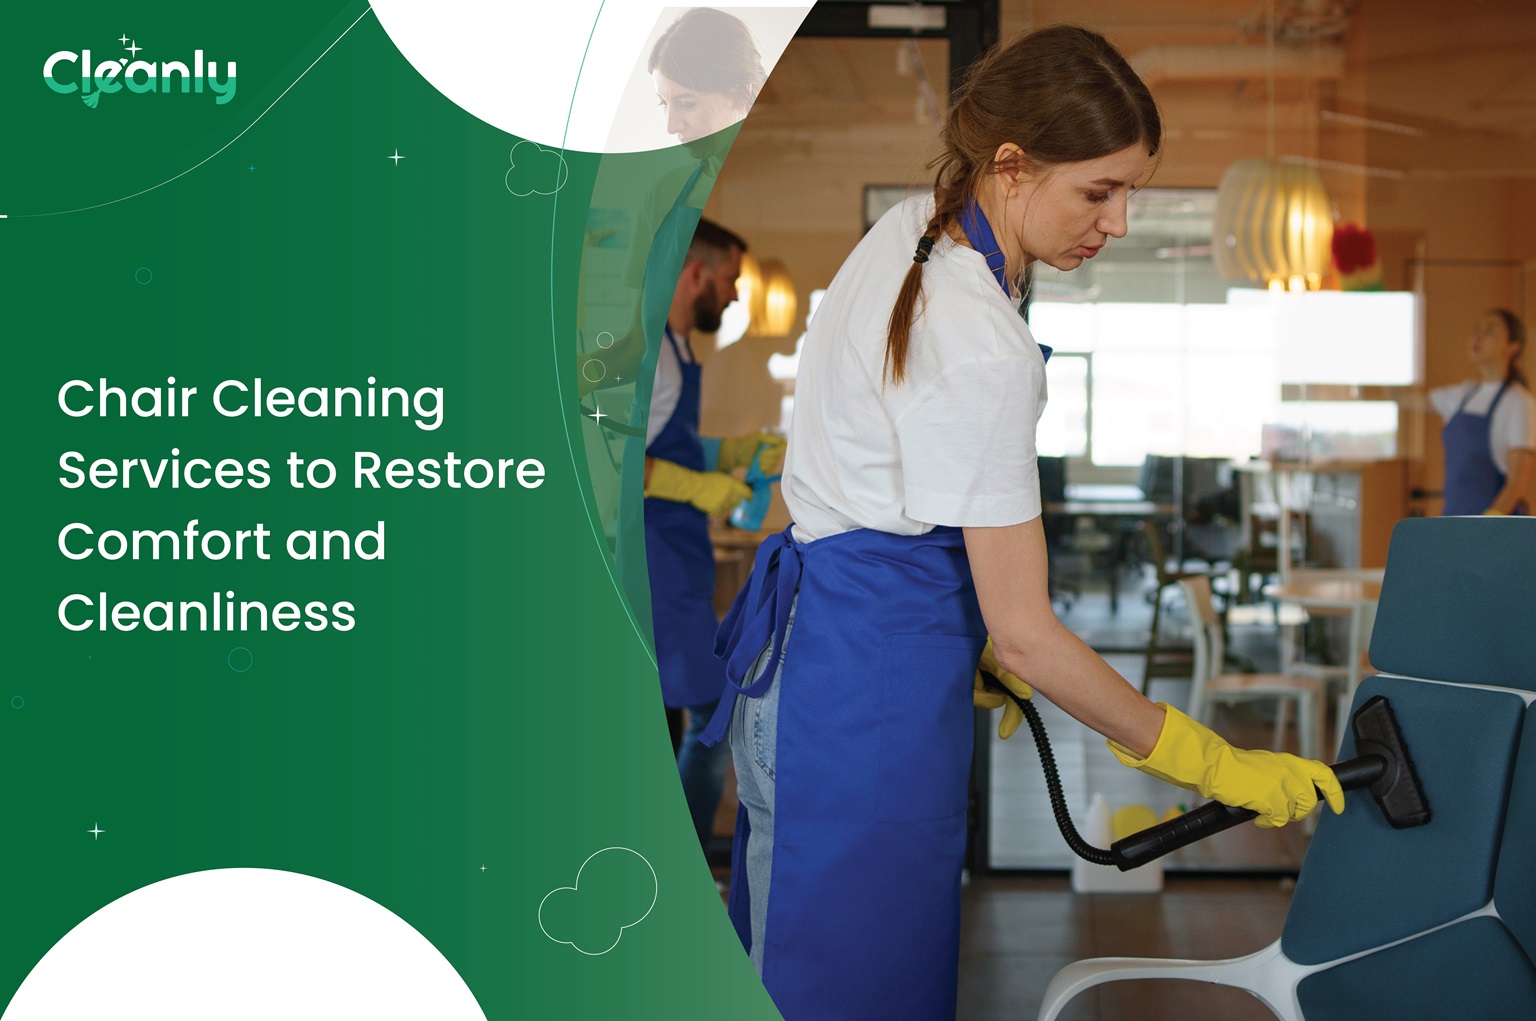 Chair Cleaning Services to Restore Comfort and Cleanliness